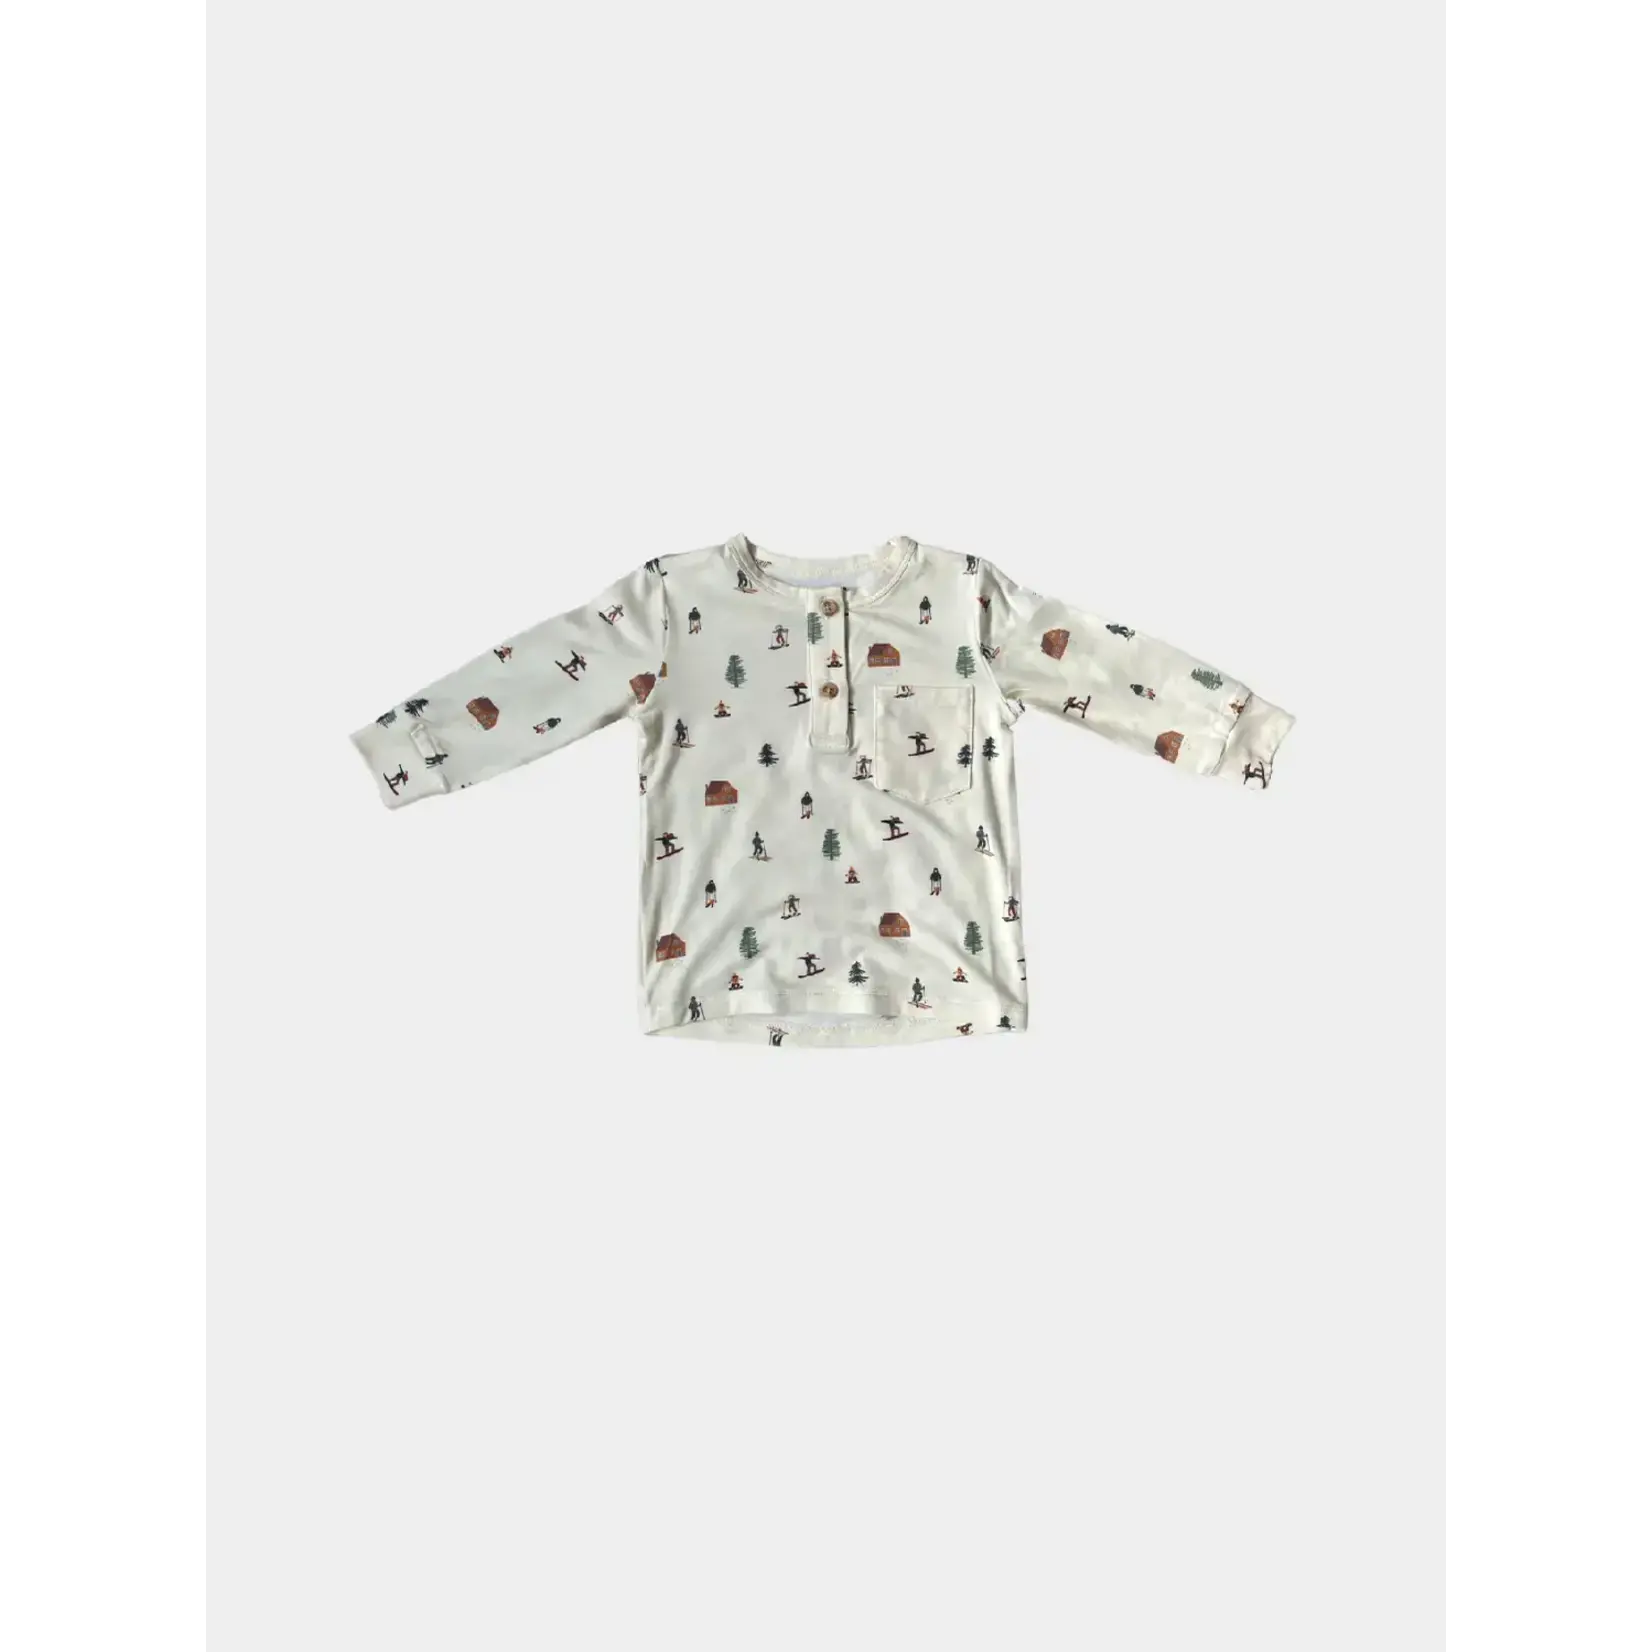 babysprouts clothing company Boy's Henley Shirt in Ski